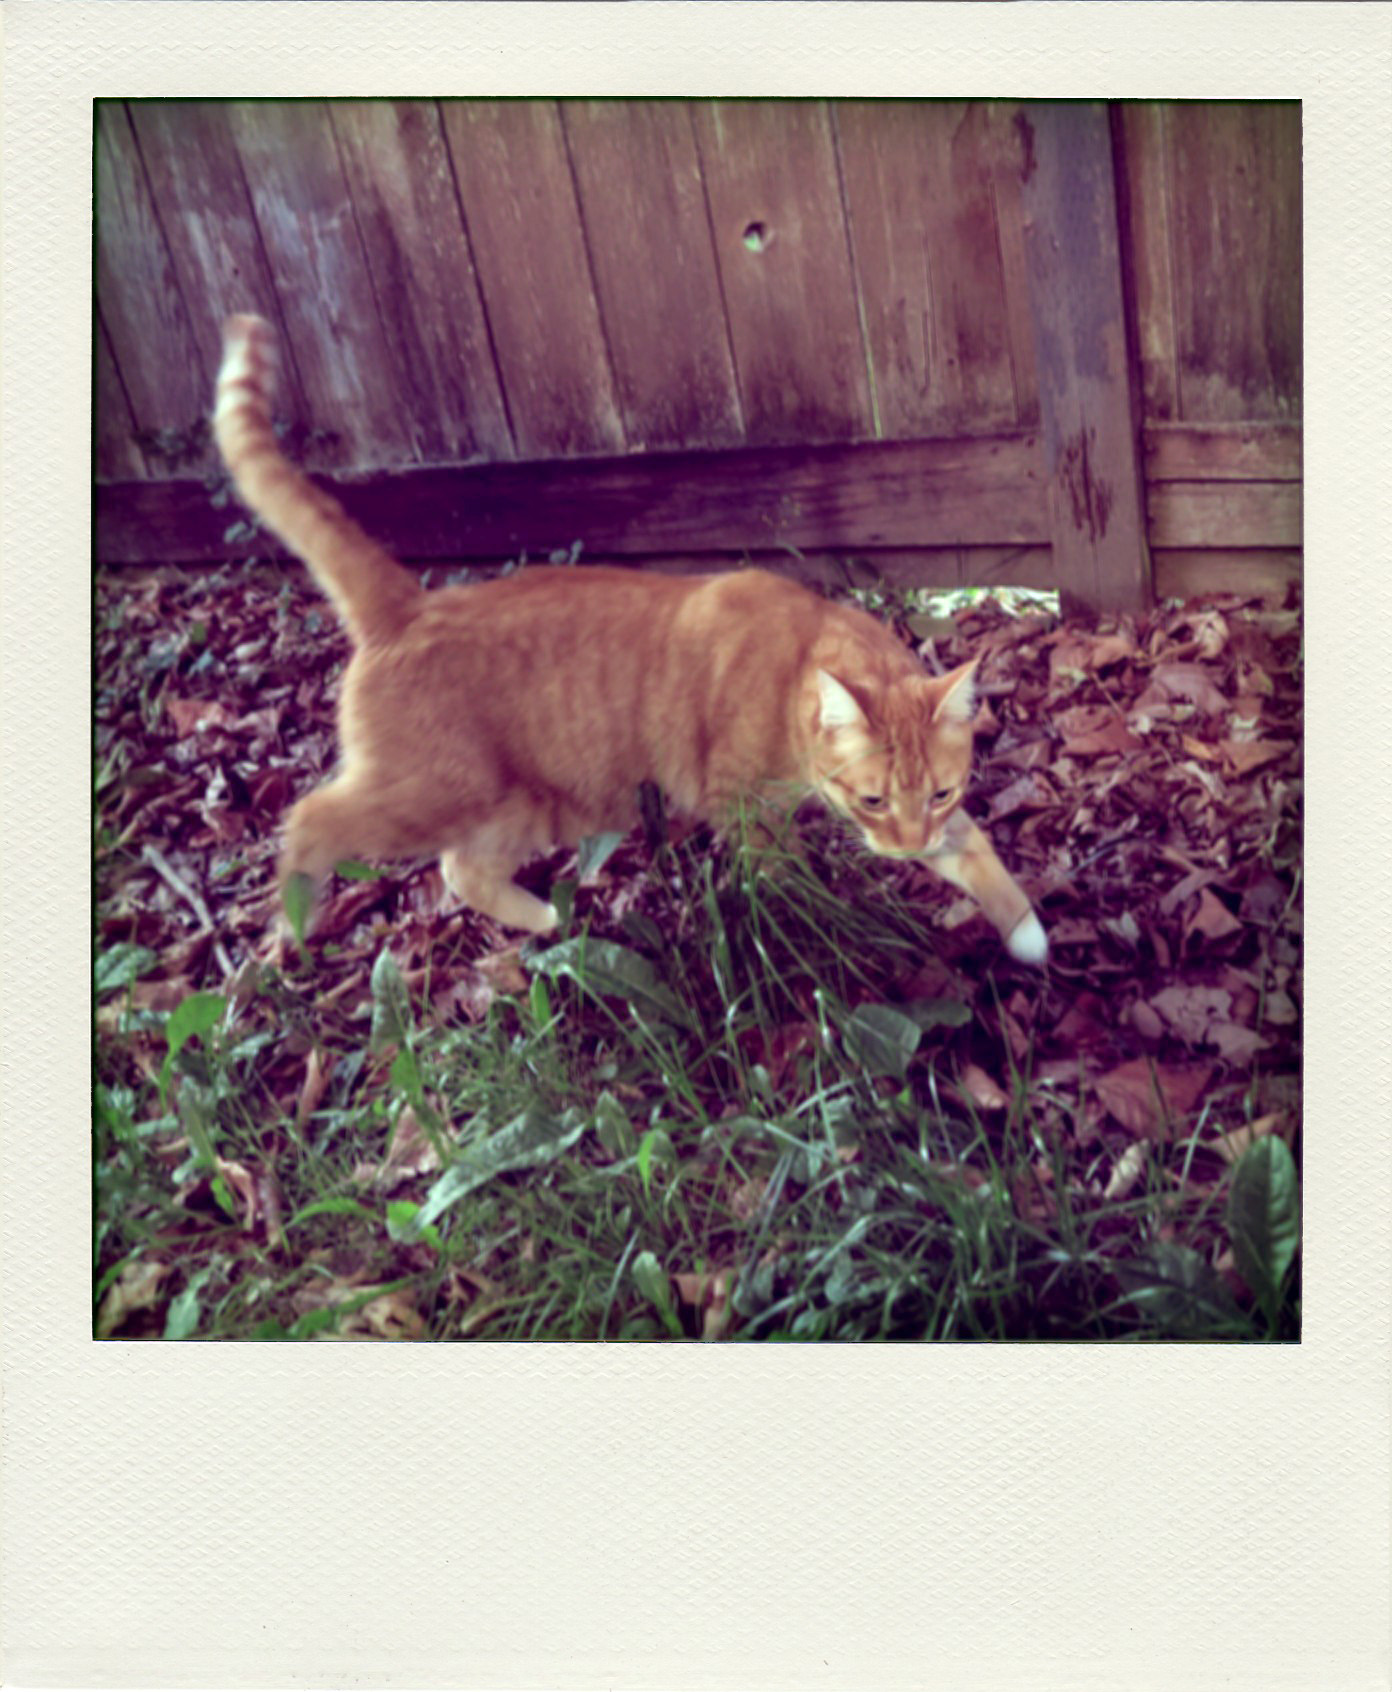 An orange tabby cat leaping in the grass.